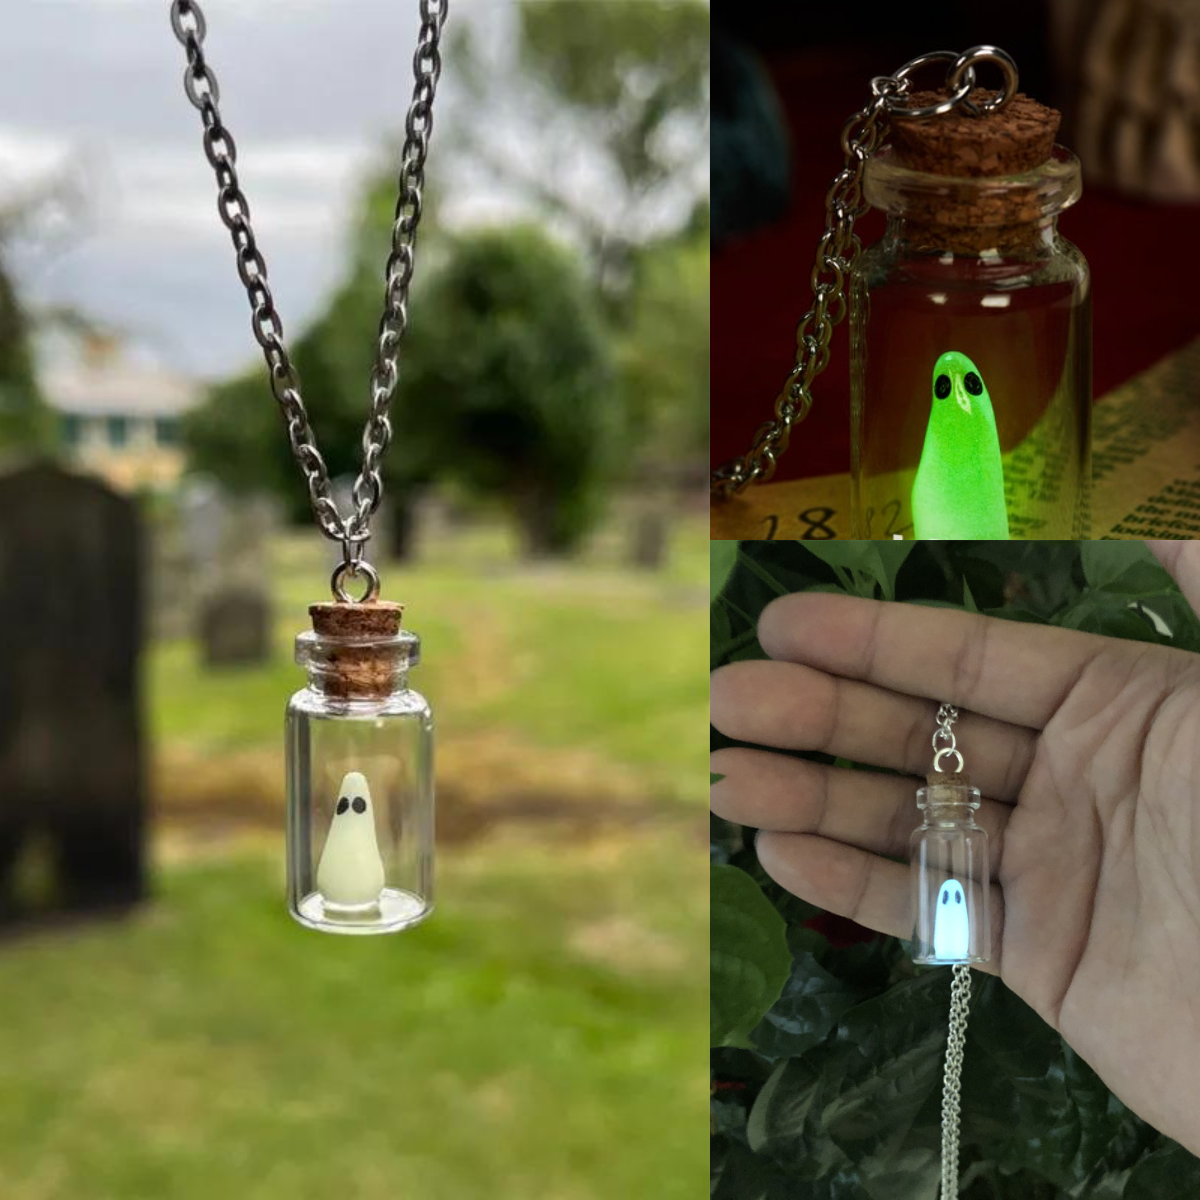 👻Pet Ghost in a Bottle Necklace - Glows in the Dark👻